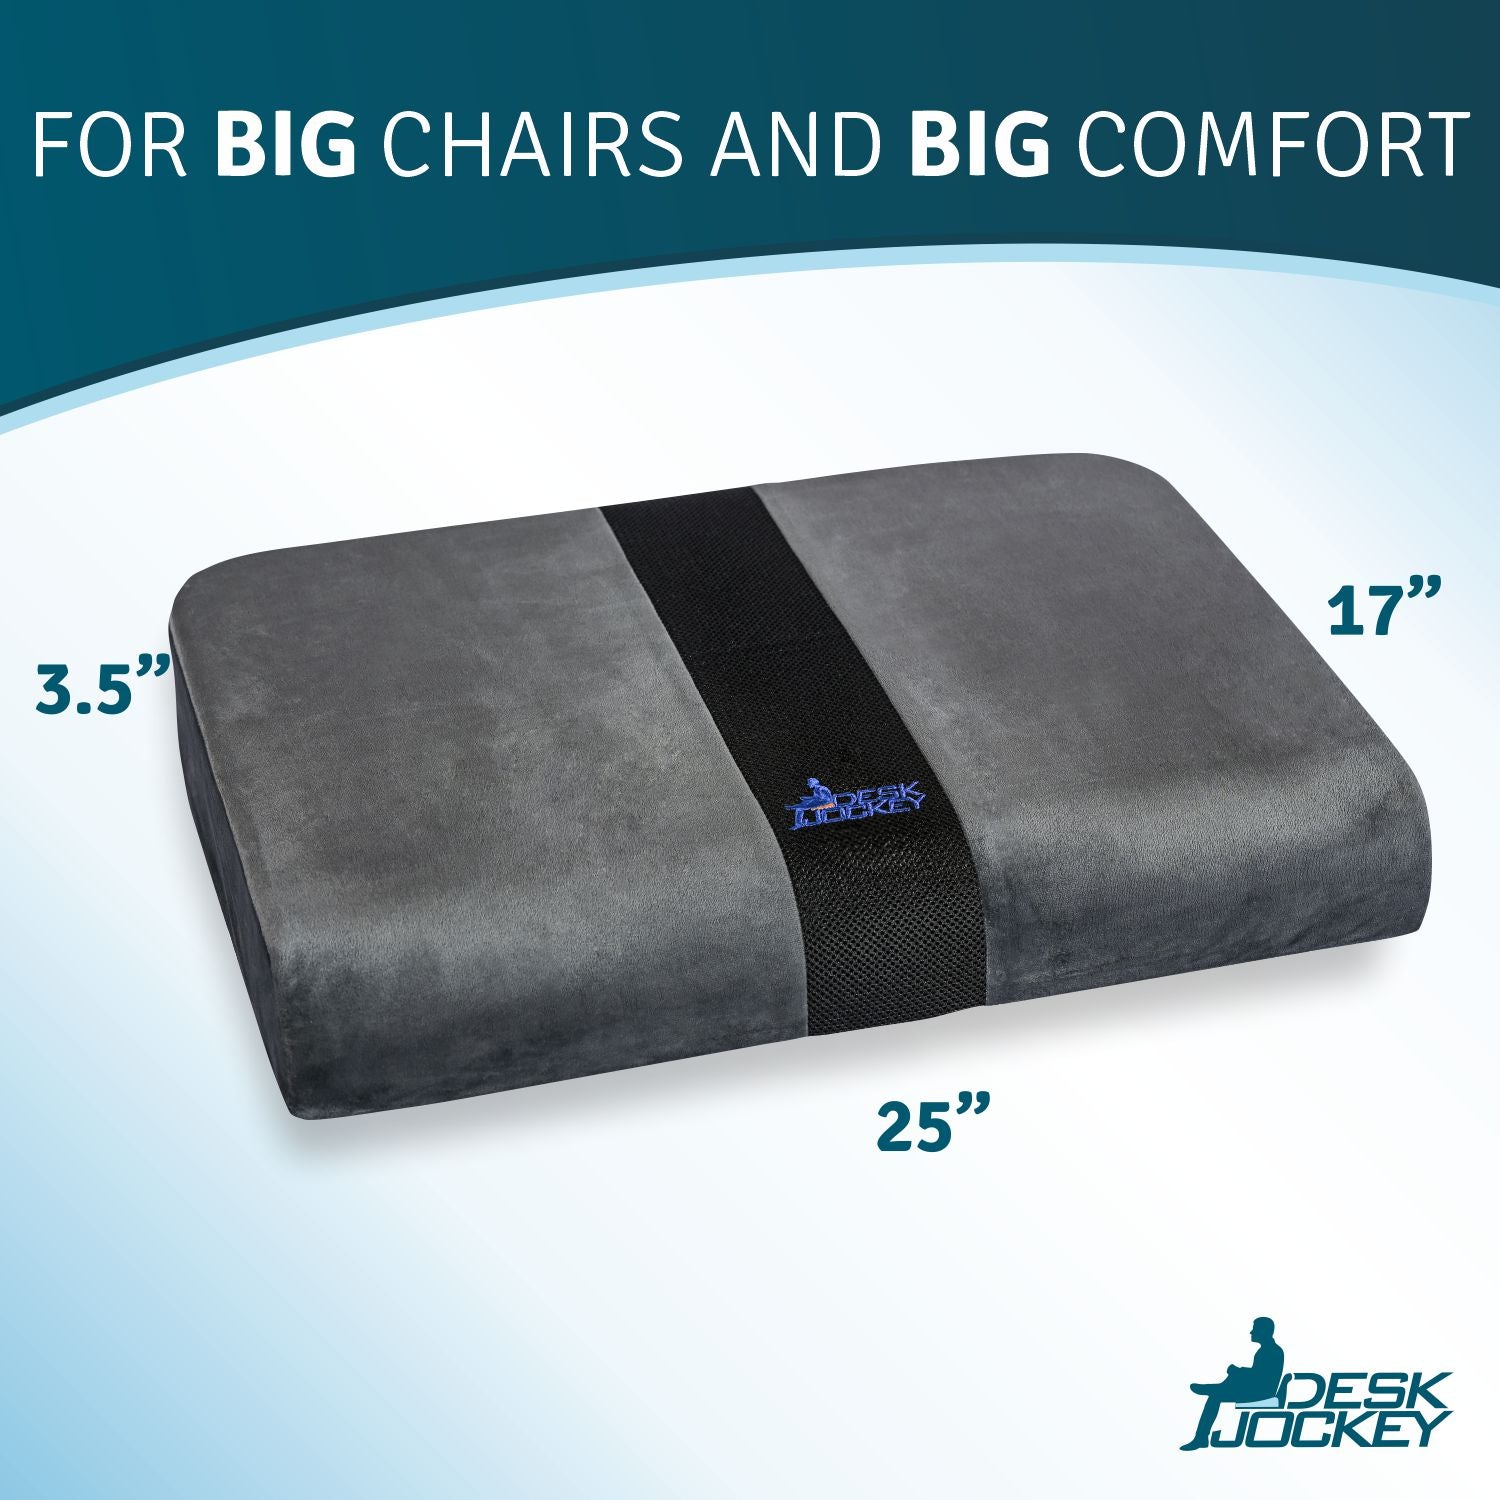 Extra Large Rise Ease Cushion and Extra Cover